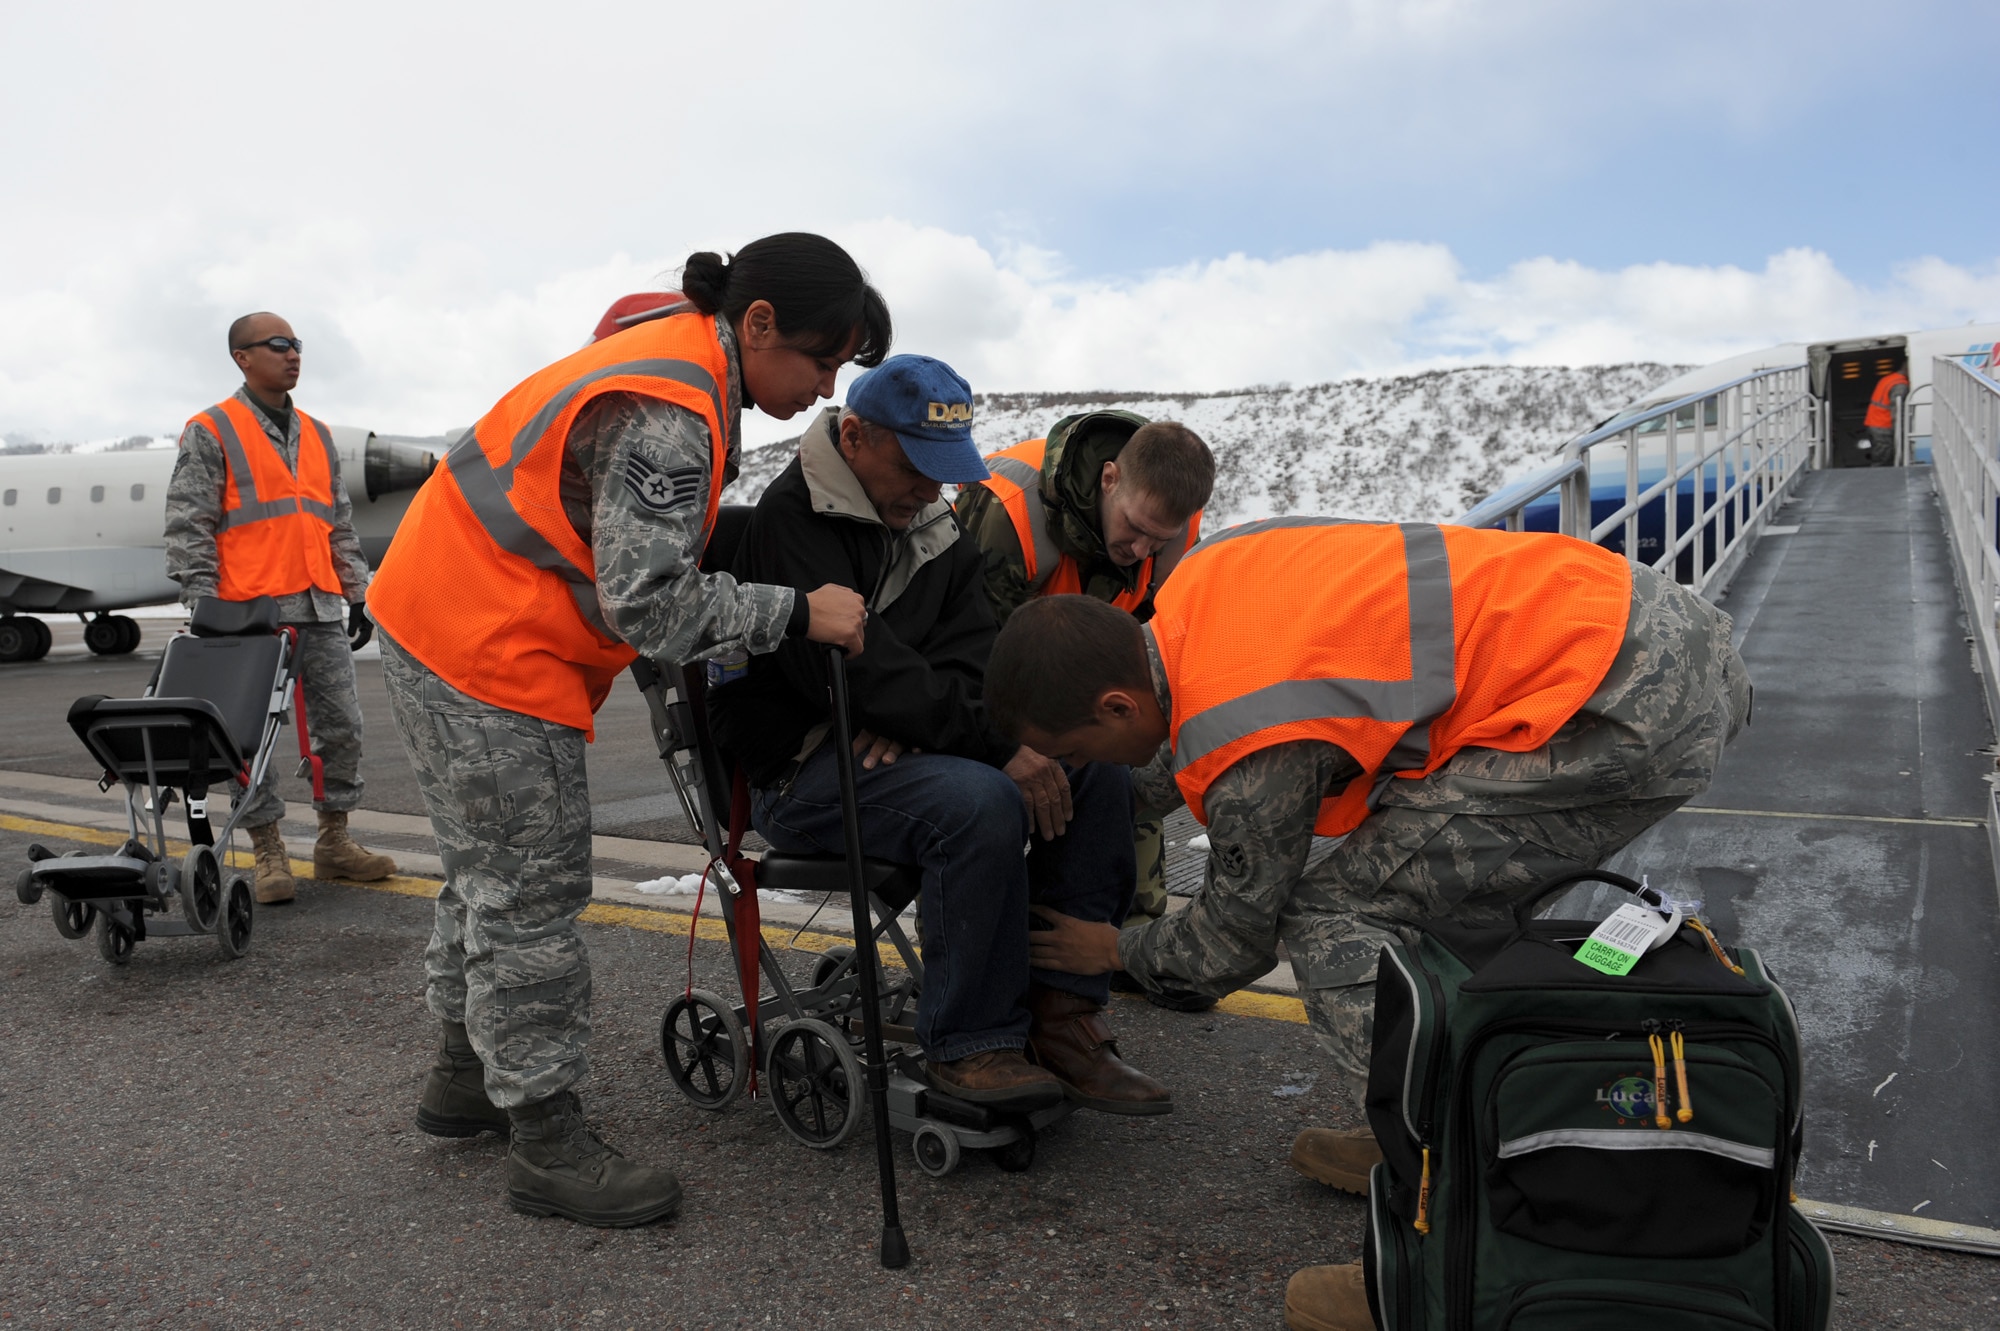 Staff Sgt. Audrey Delong, Tech. Sgt. Dennis Leskovec and Airman First Class Taylor Quintero help a veteran into a wheelchair March 27, 2010, at the airport in Aspen, Colo. Veterans were arriving from all over the world for the 24th National Disabled American Veterans Winter Sports Clinic.  The three volunteers from Luke Air Force Base, Ariz., were there to assist veterans arriving for the games. (U.S. Air Force photo/Staff Sgt. Desiree N. Palacios)